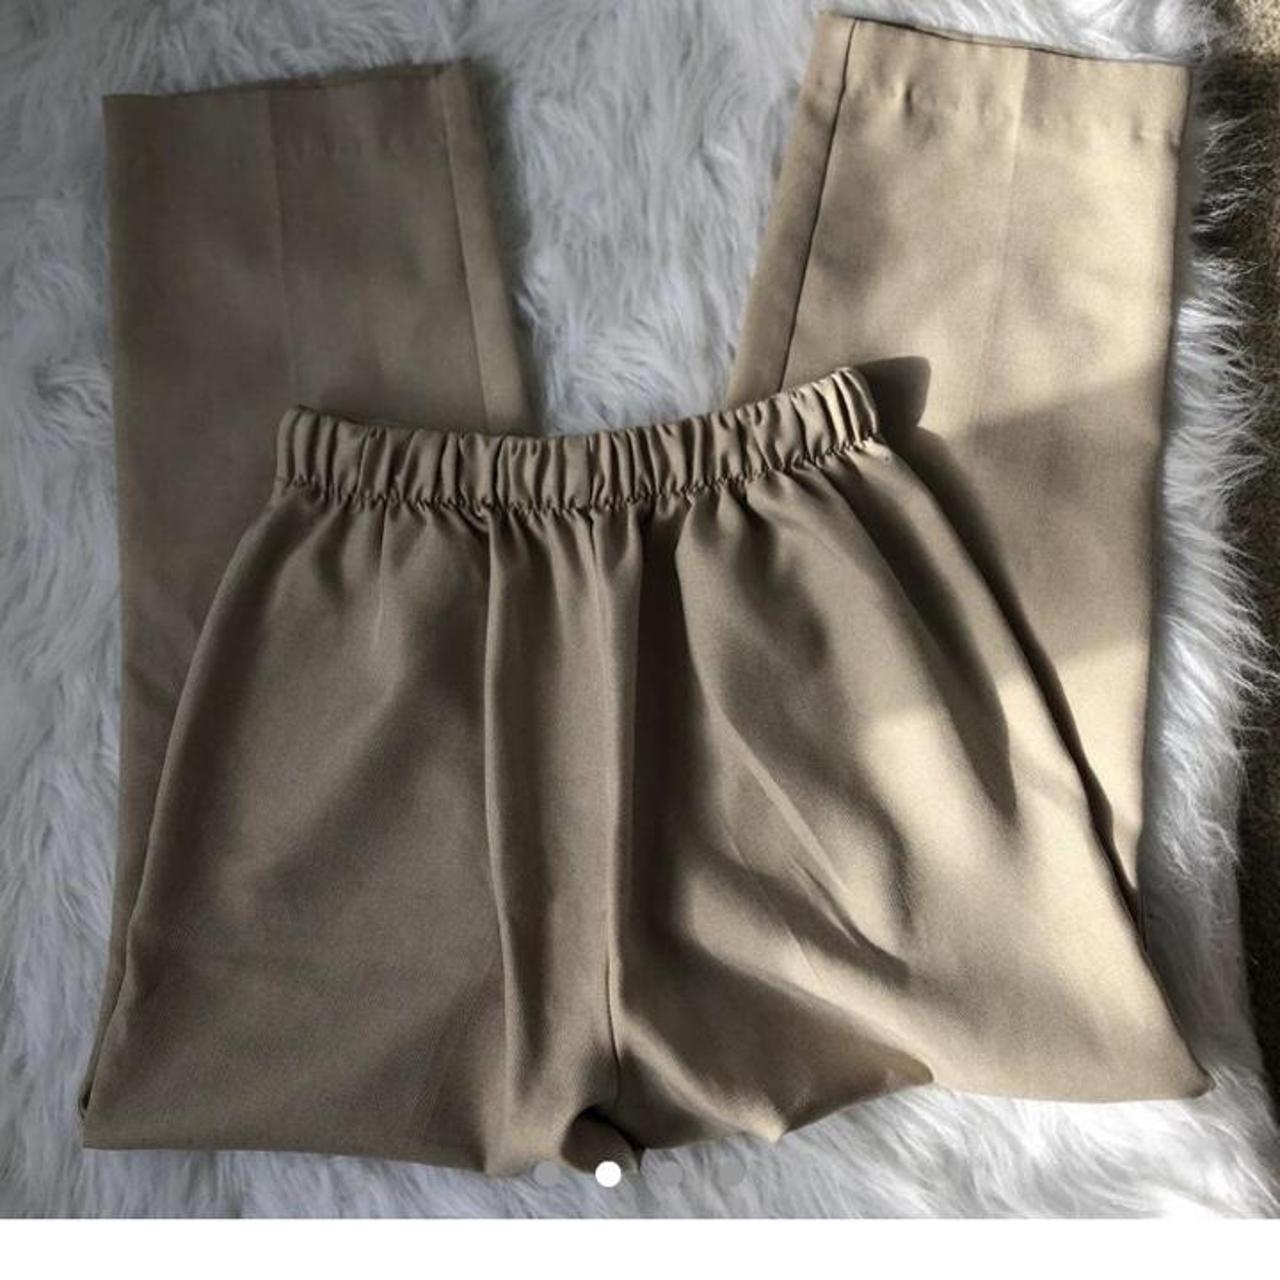 Women's Tan and Cream Trousers (3)